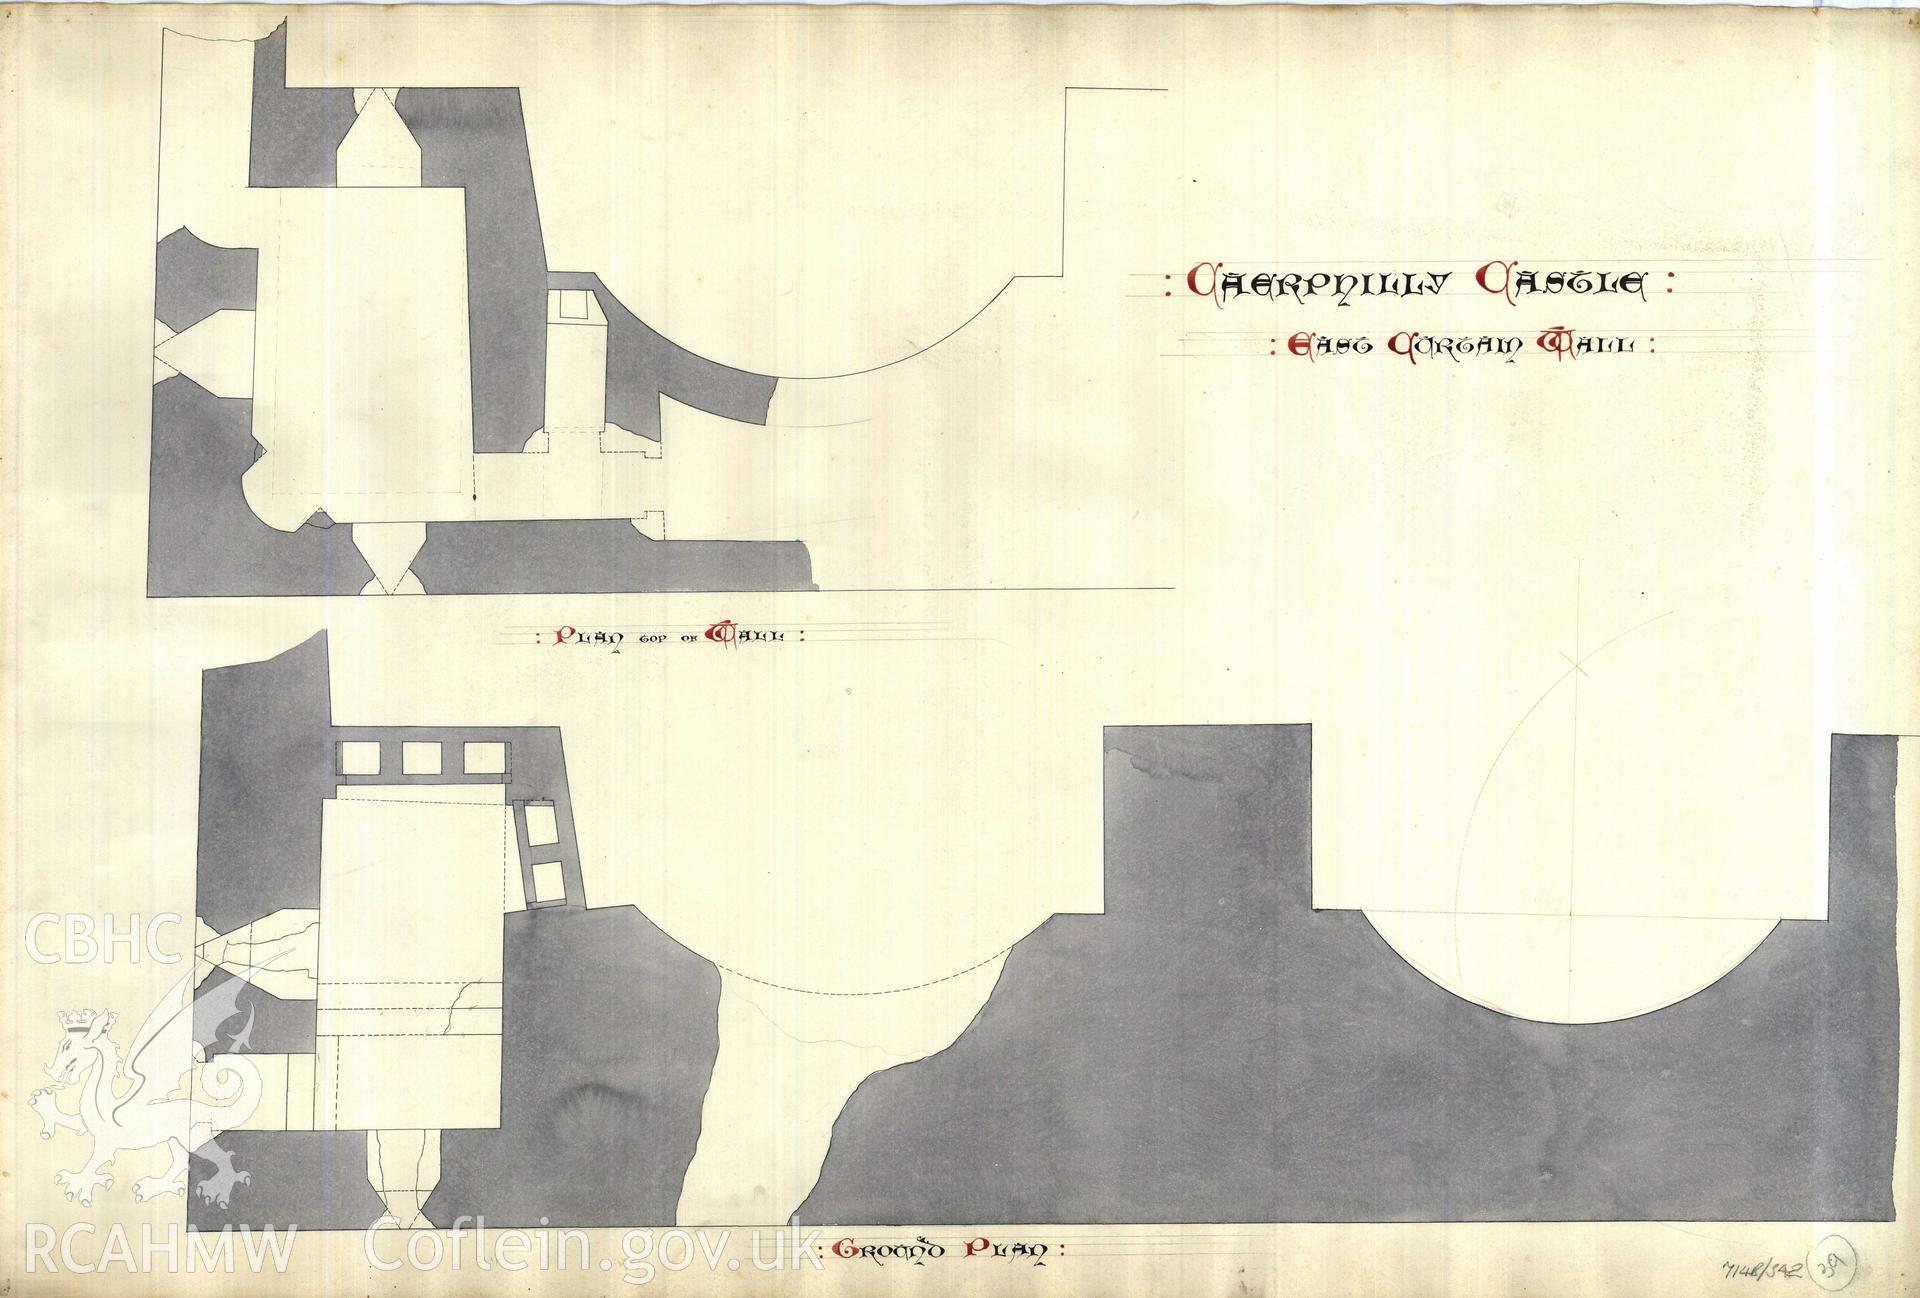 Cadw guardianship monument drawing of Caerphilly Castle. Dam front S, 2 N bays, plan. Cadw Ref. No:714B/342. Scale 1:24.